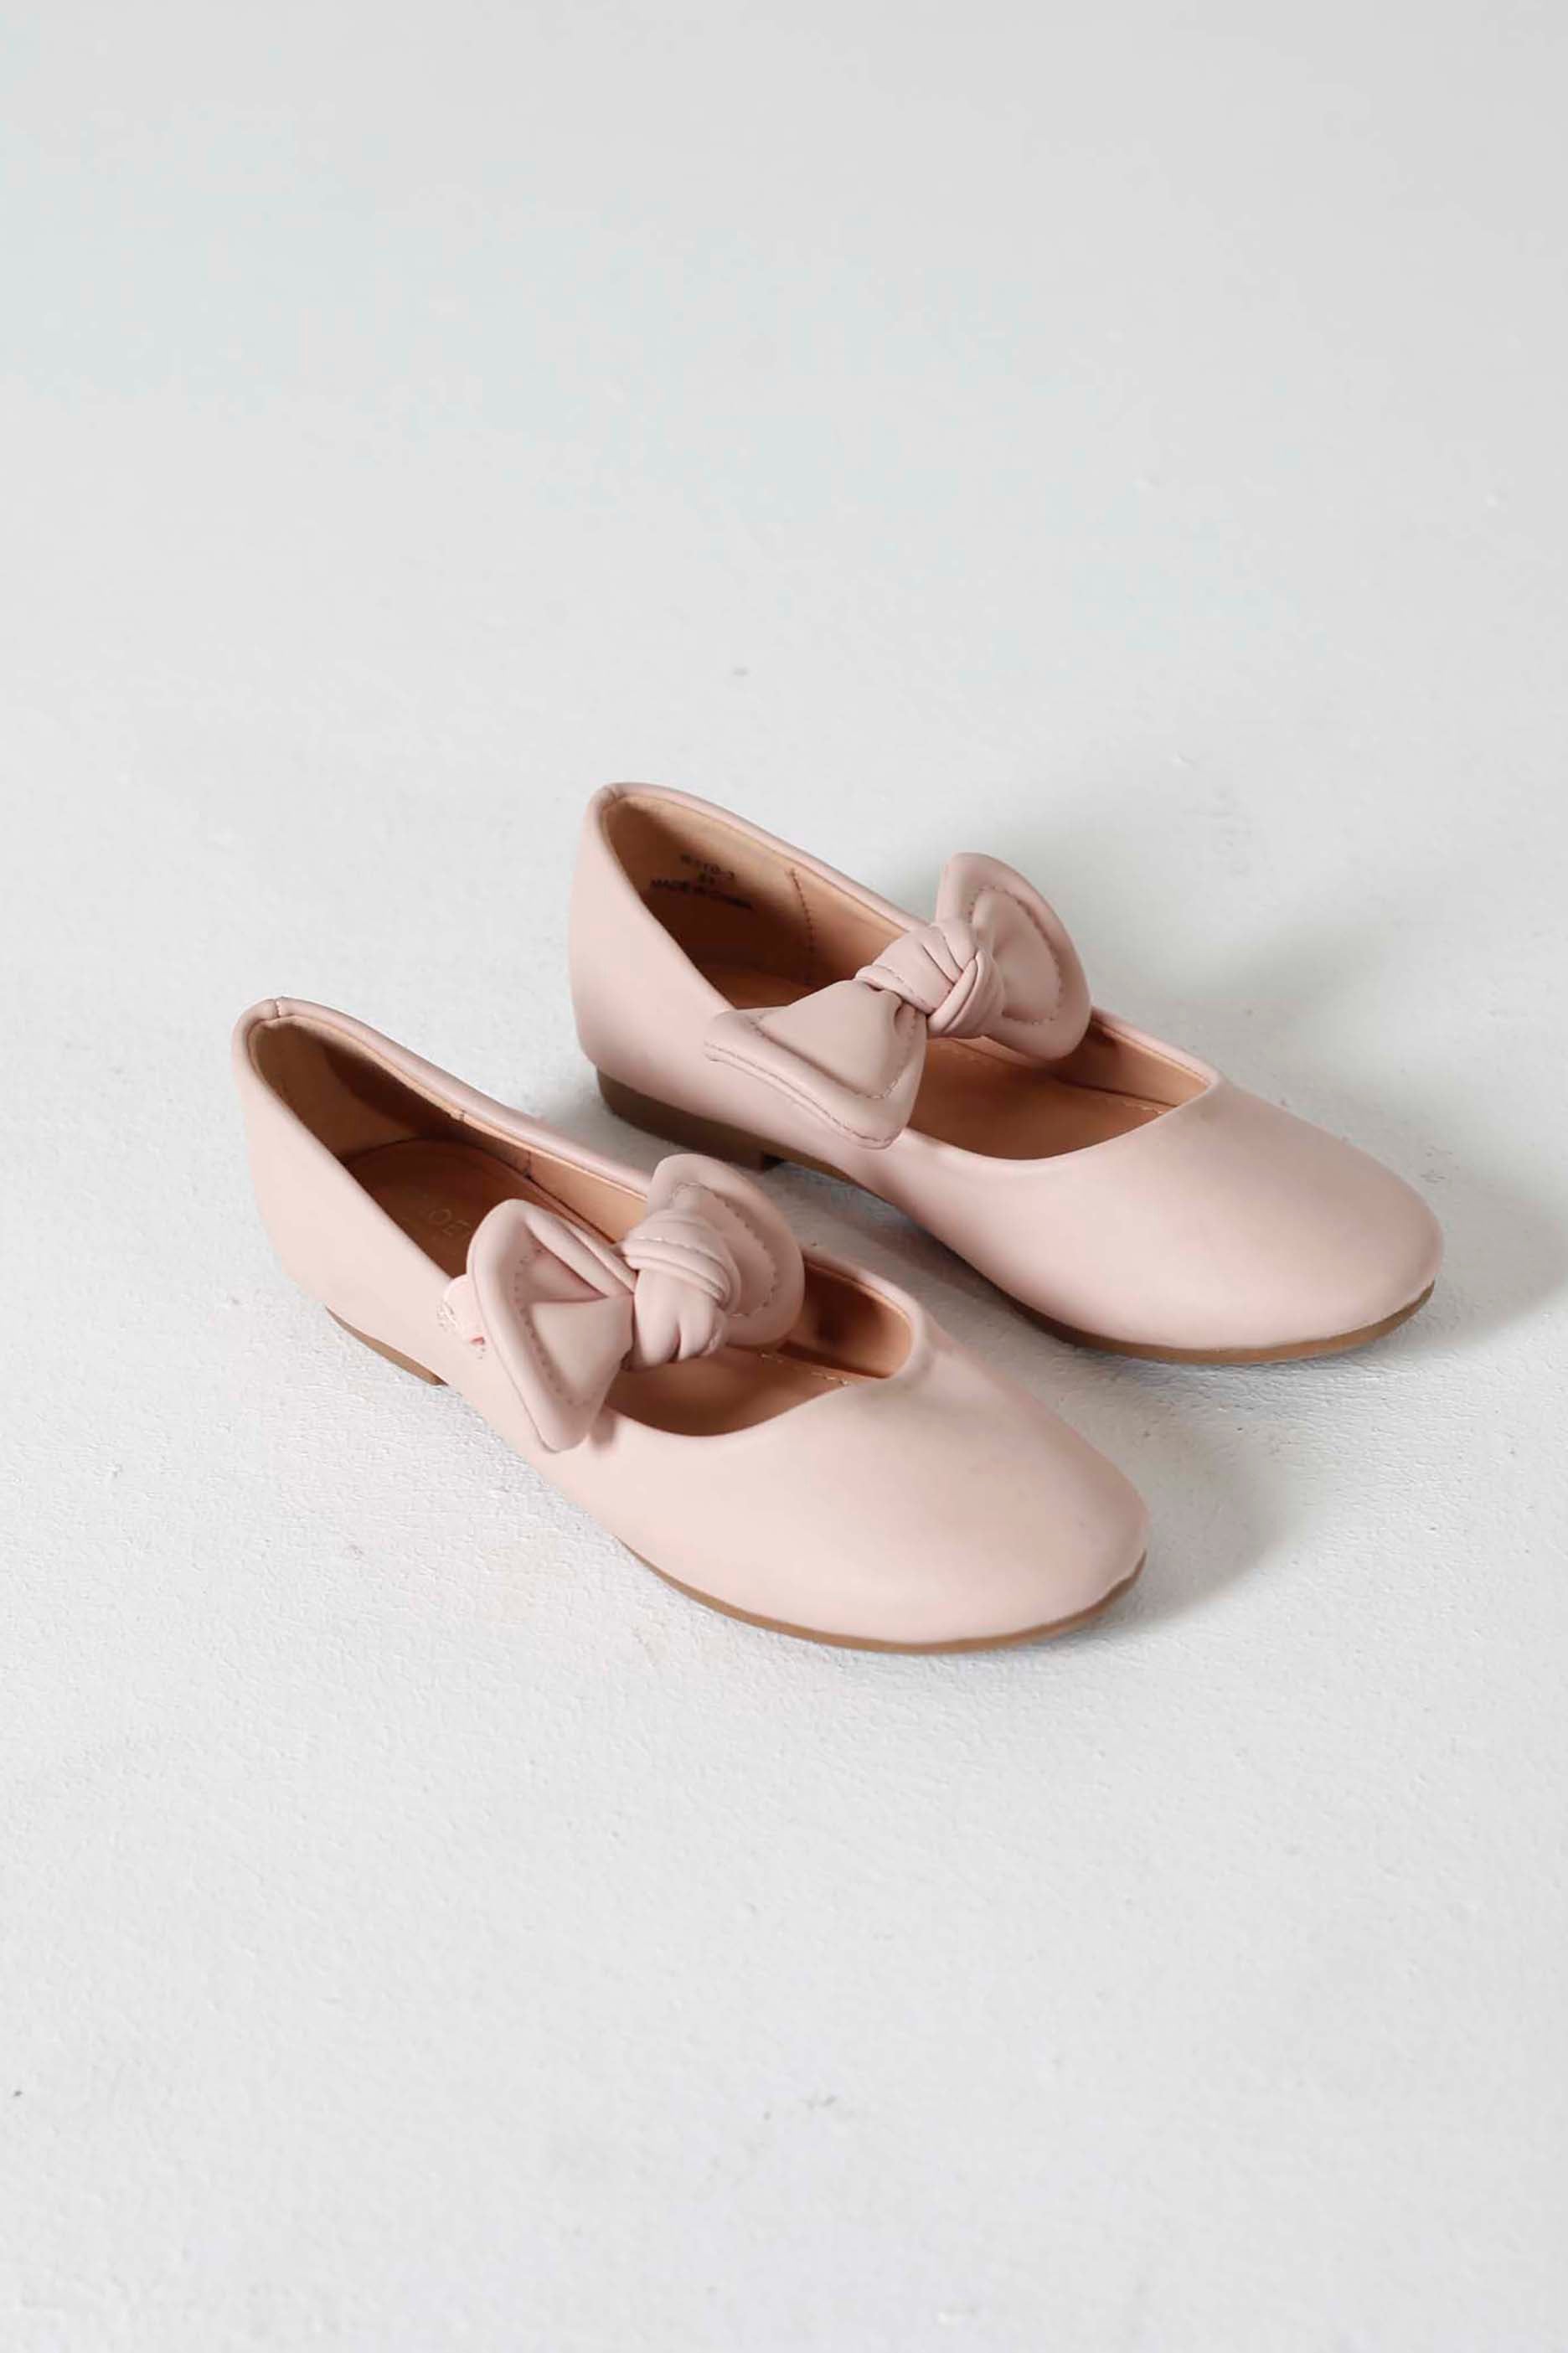 Girls Pink Flats with Bow